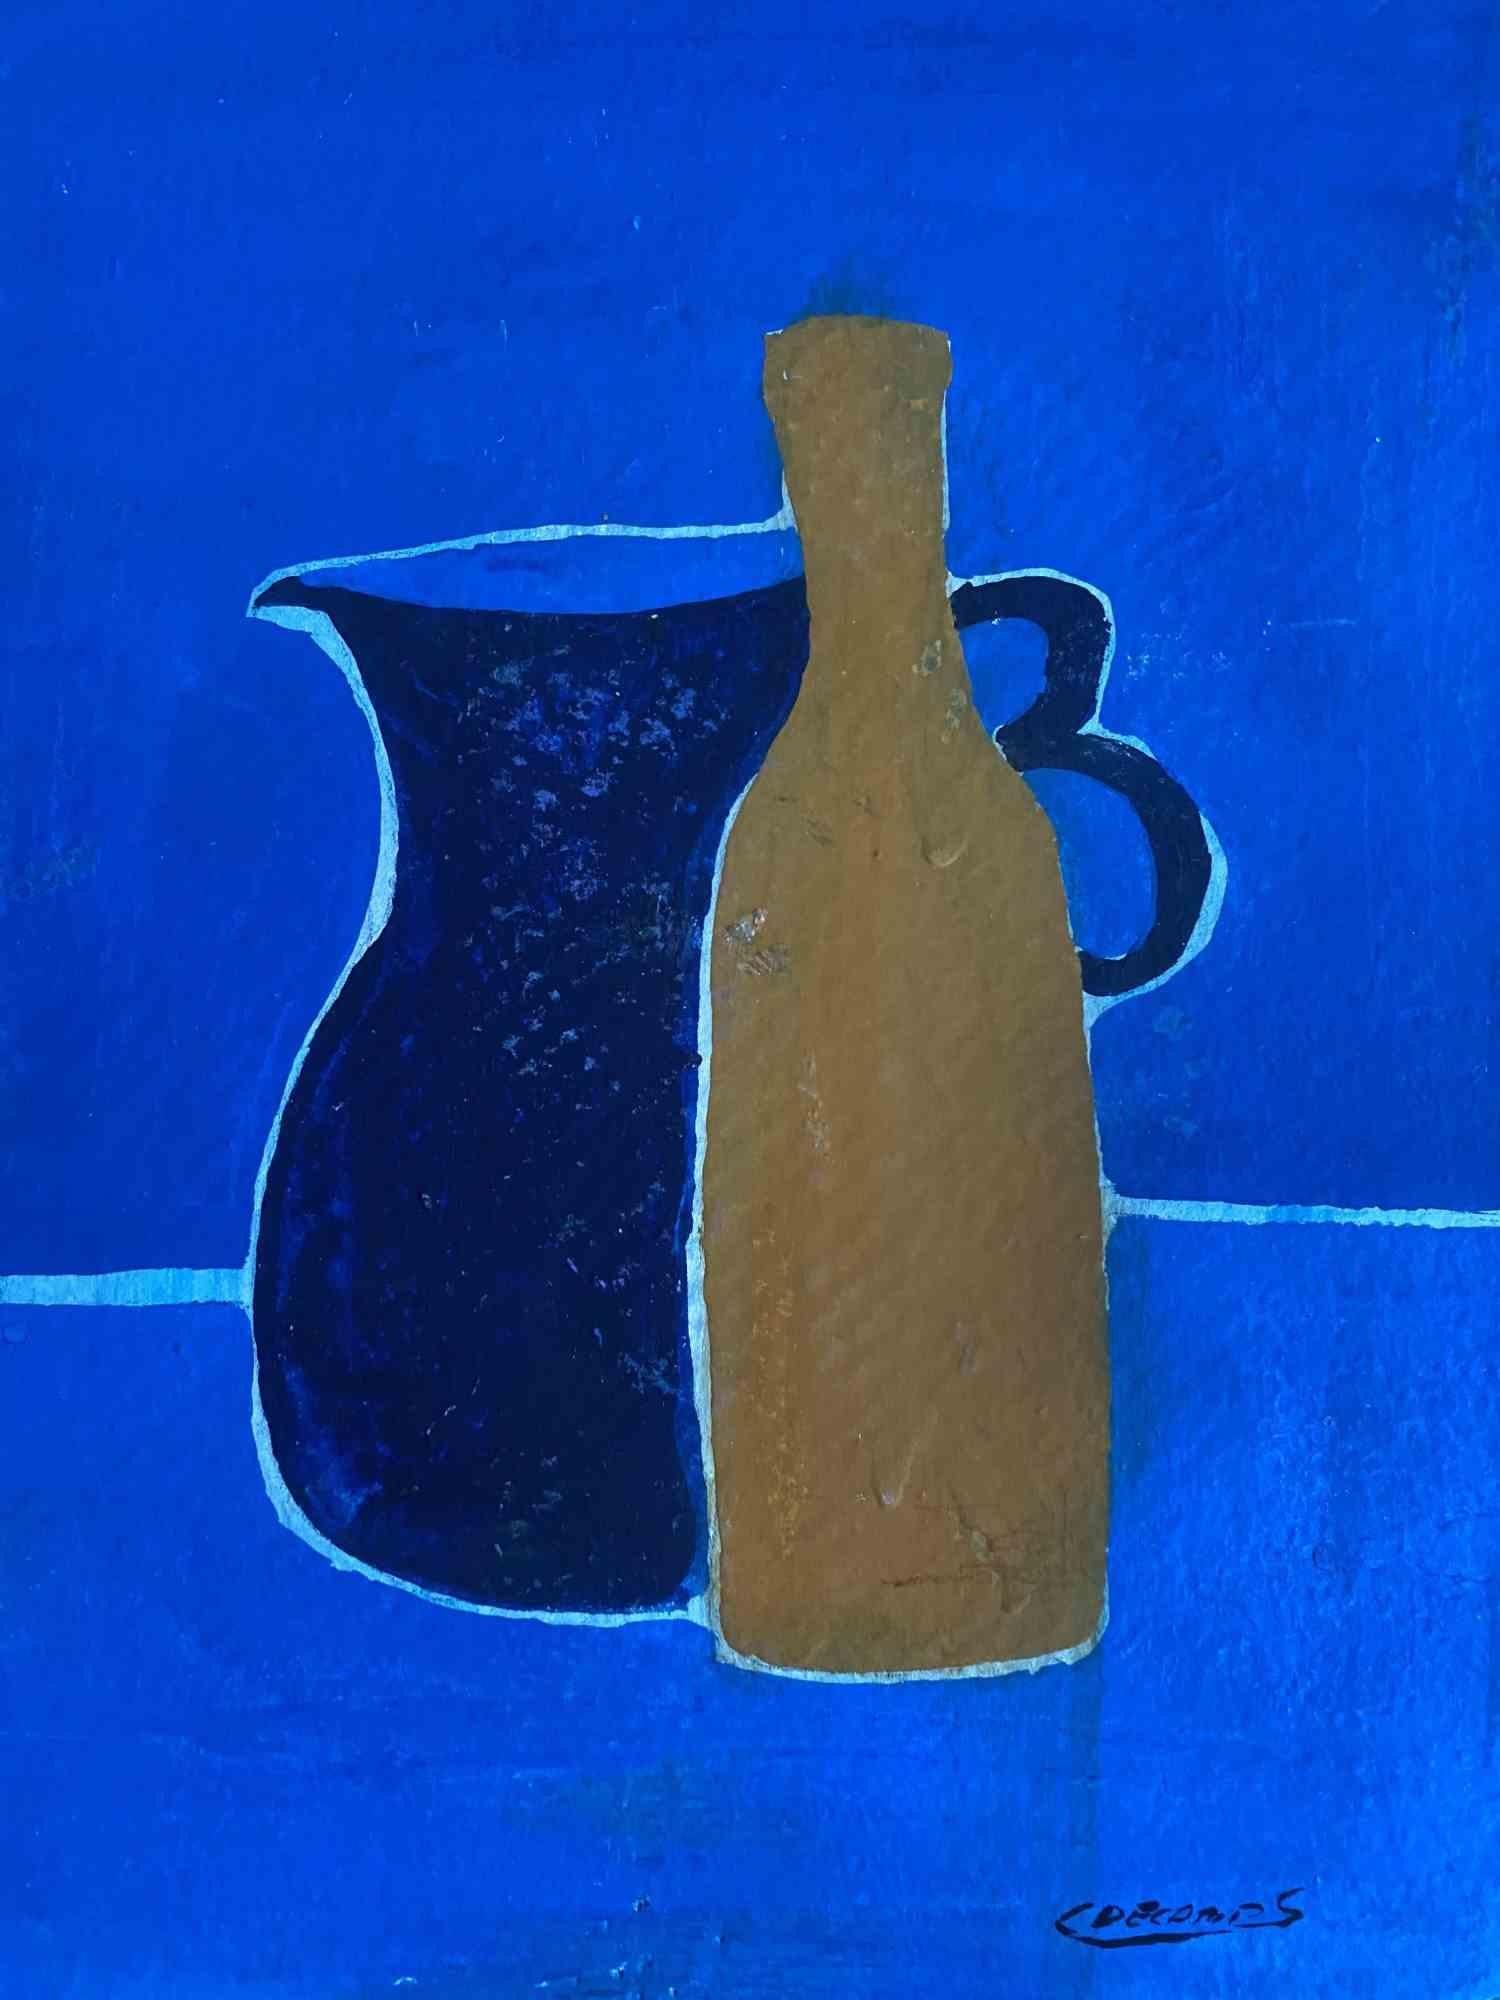 The Still Life - Oil Painting by Claude Decamps - 1970s